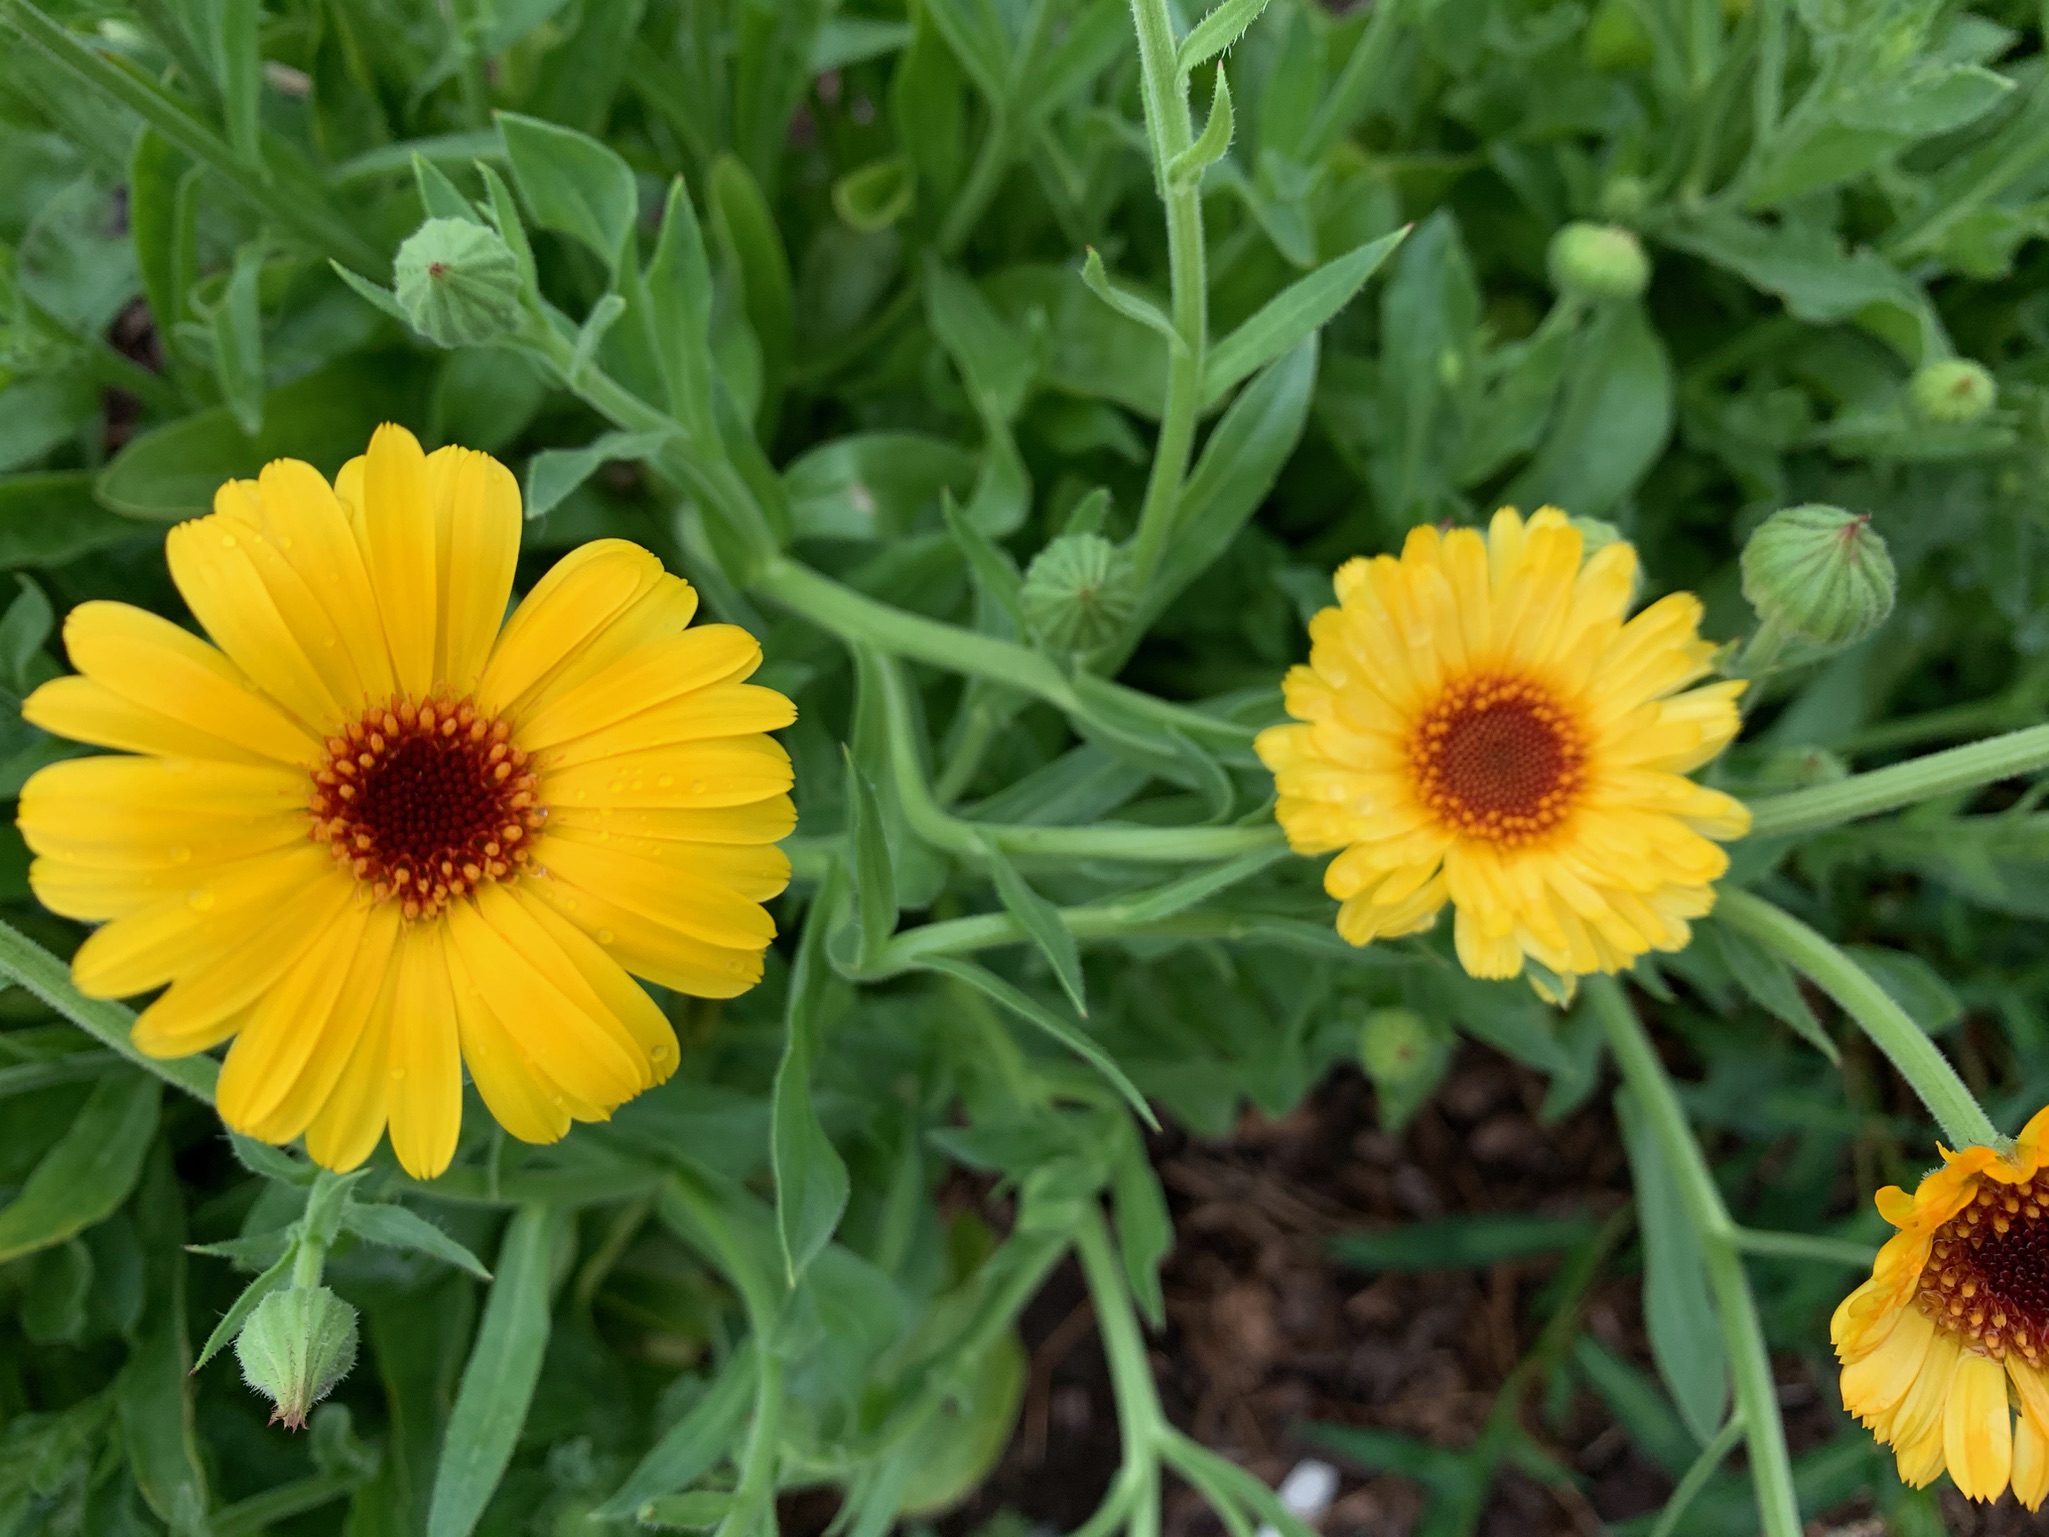 Bright Calendula Flowers are lovely for crafting an infused oil